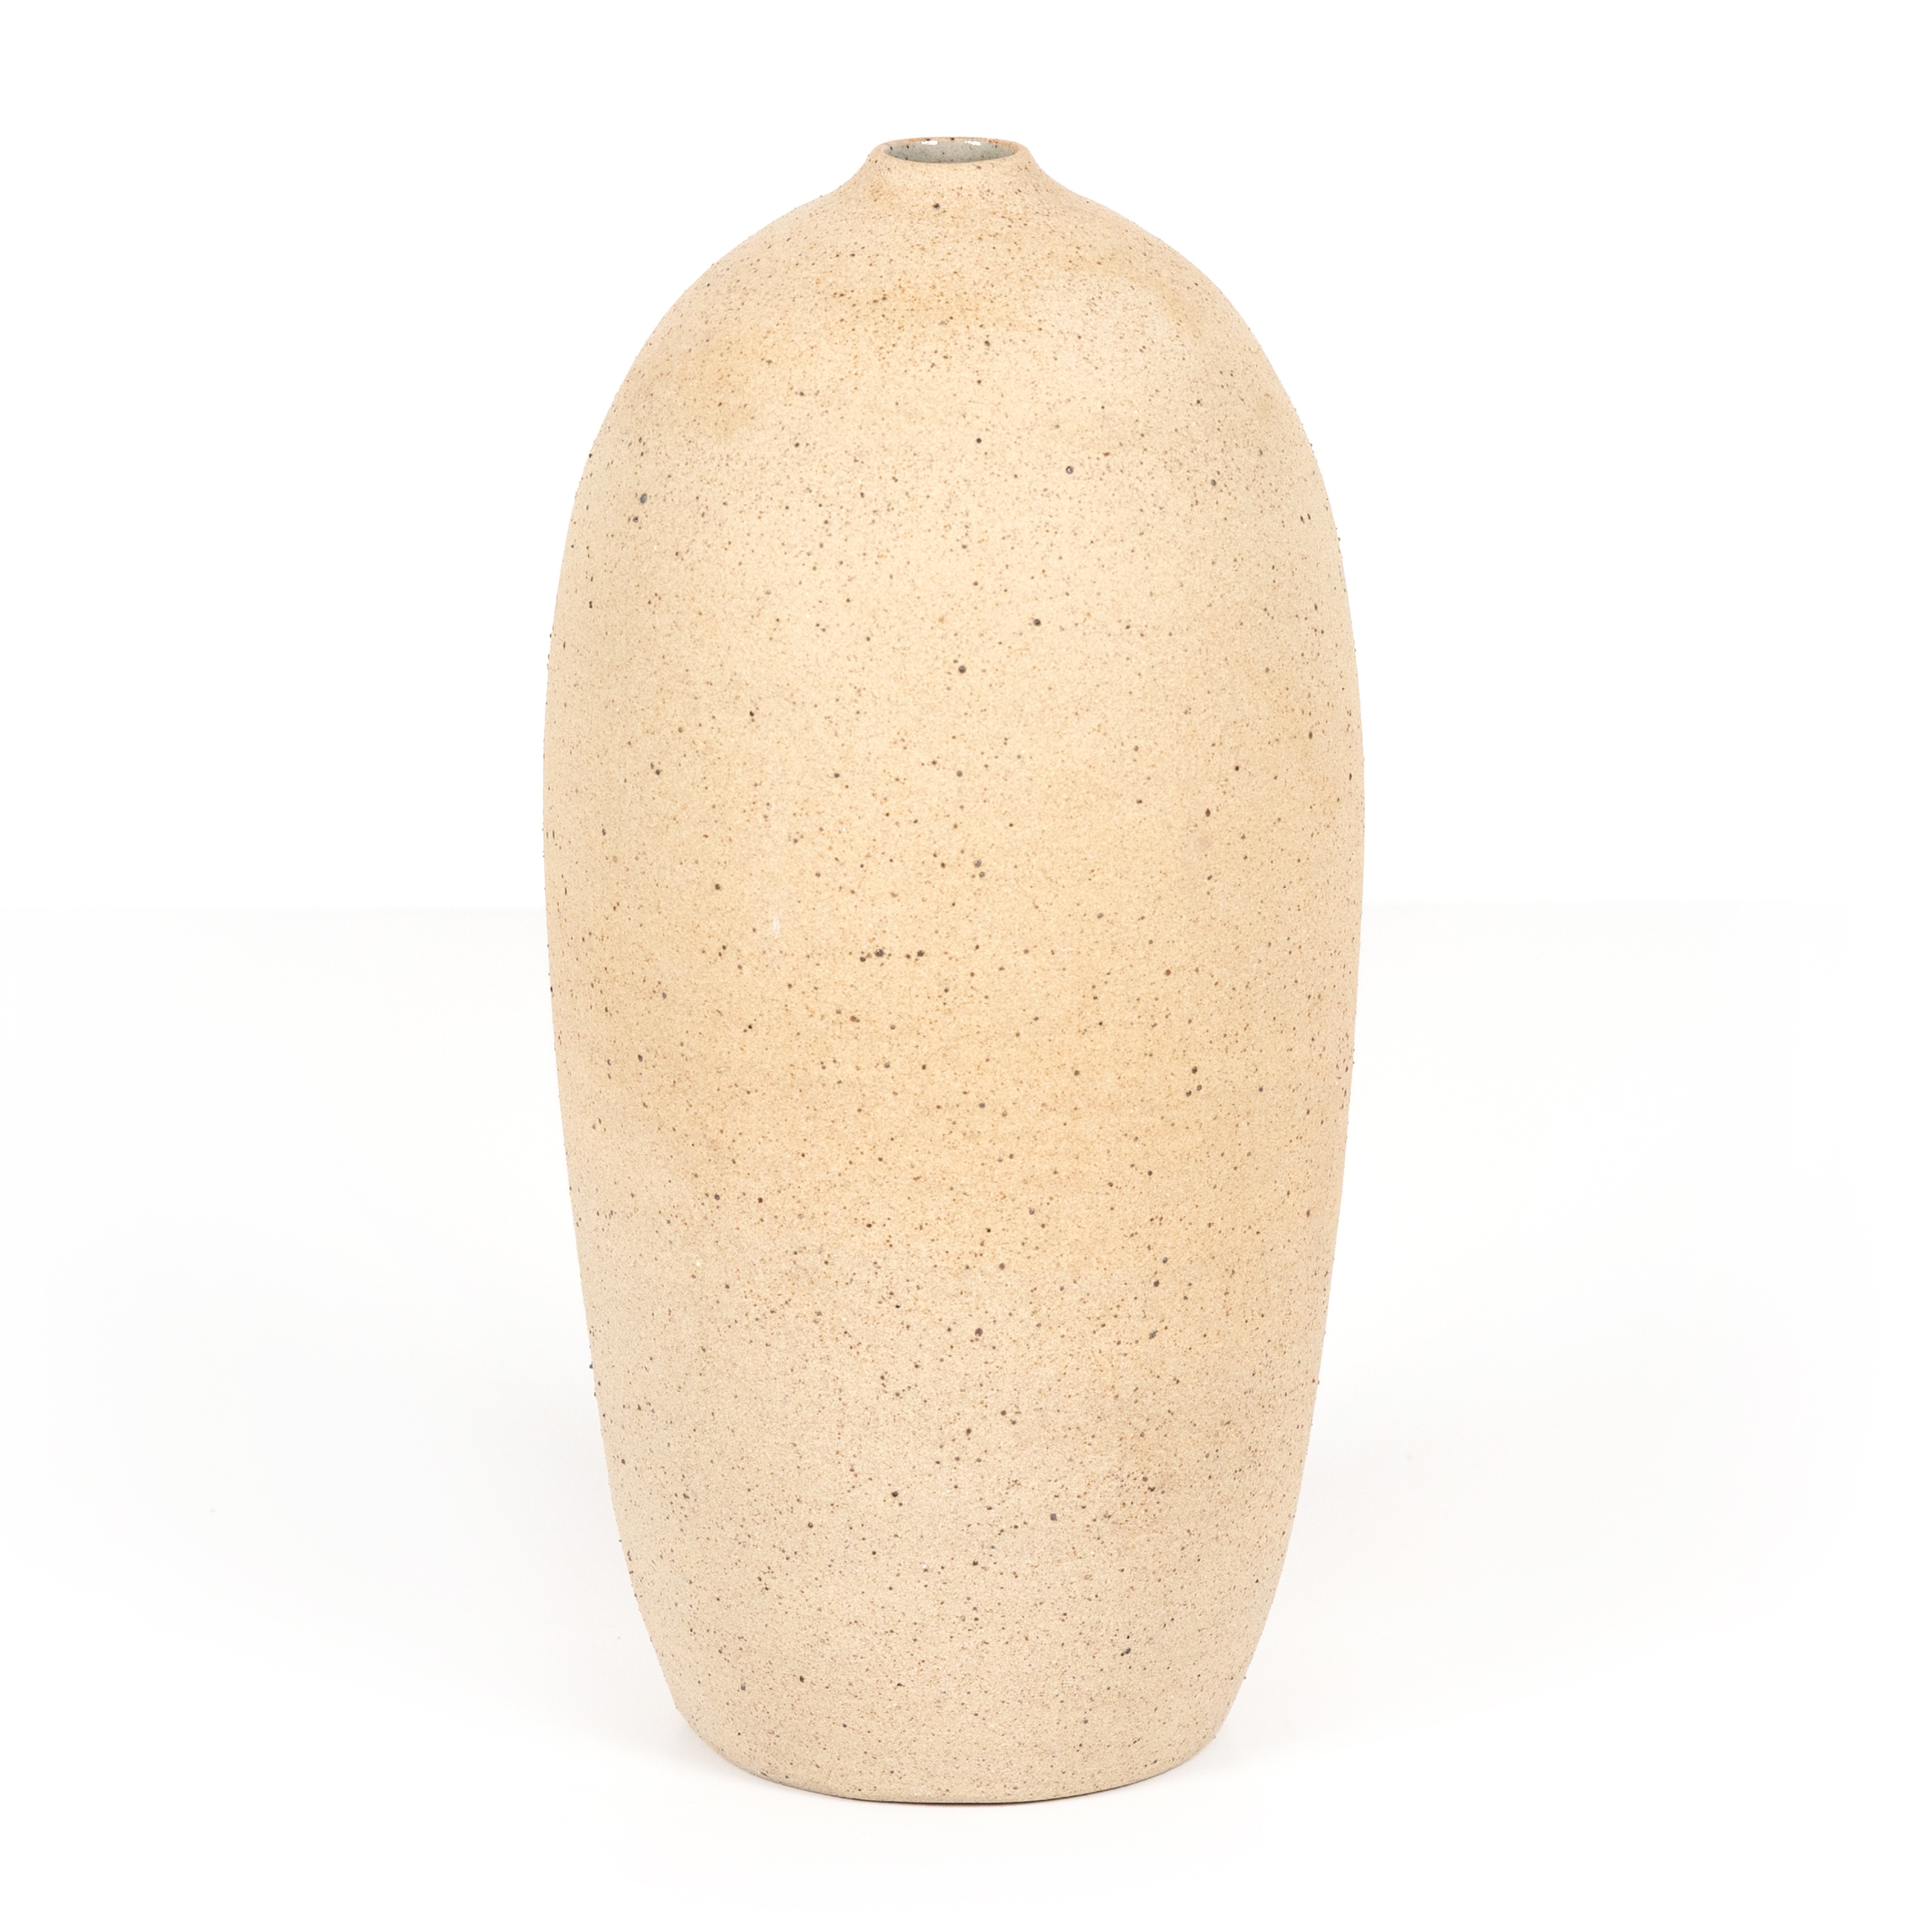 Izan Tall Vase-Natural Speckled Clay - Image 0